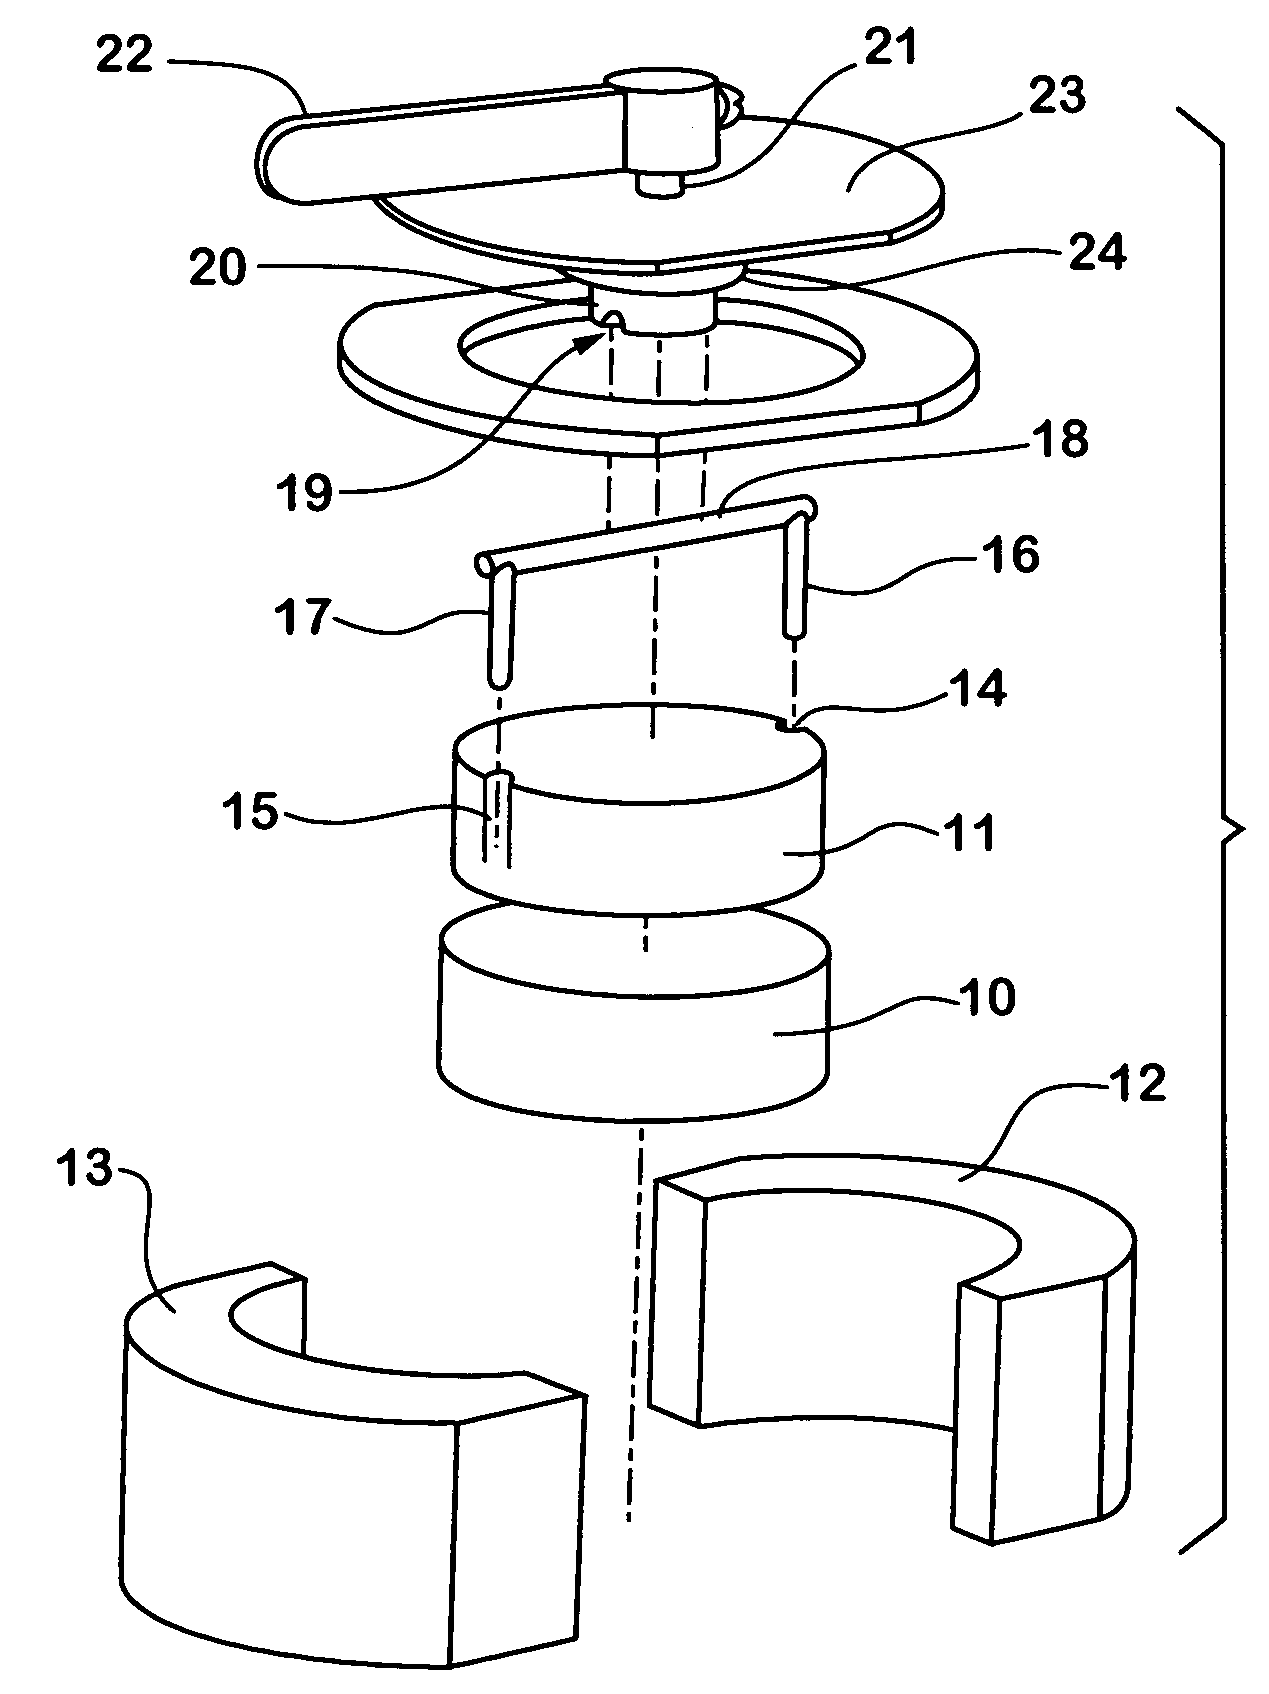 Switchable permanent magnetic device